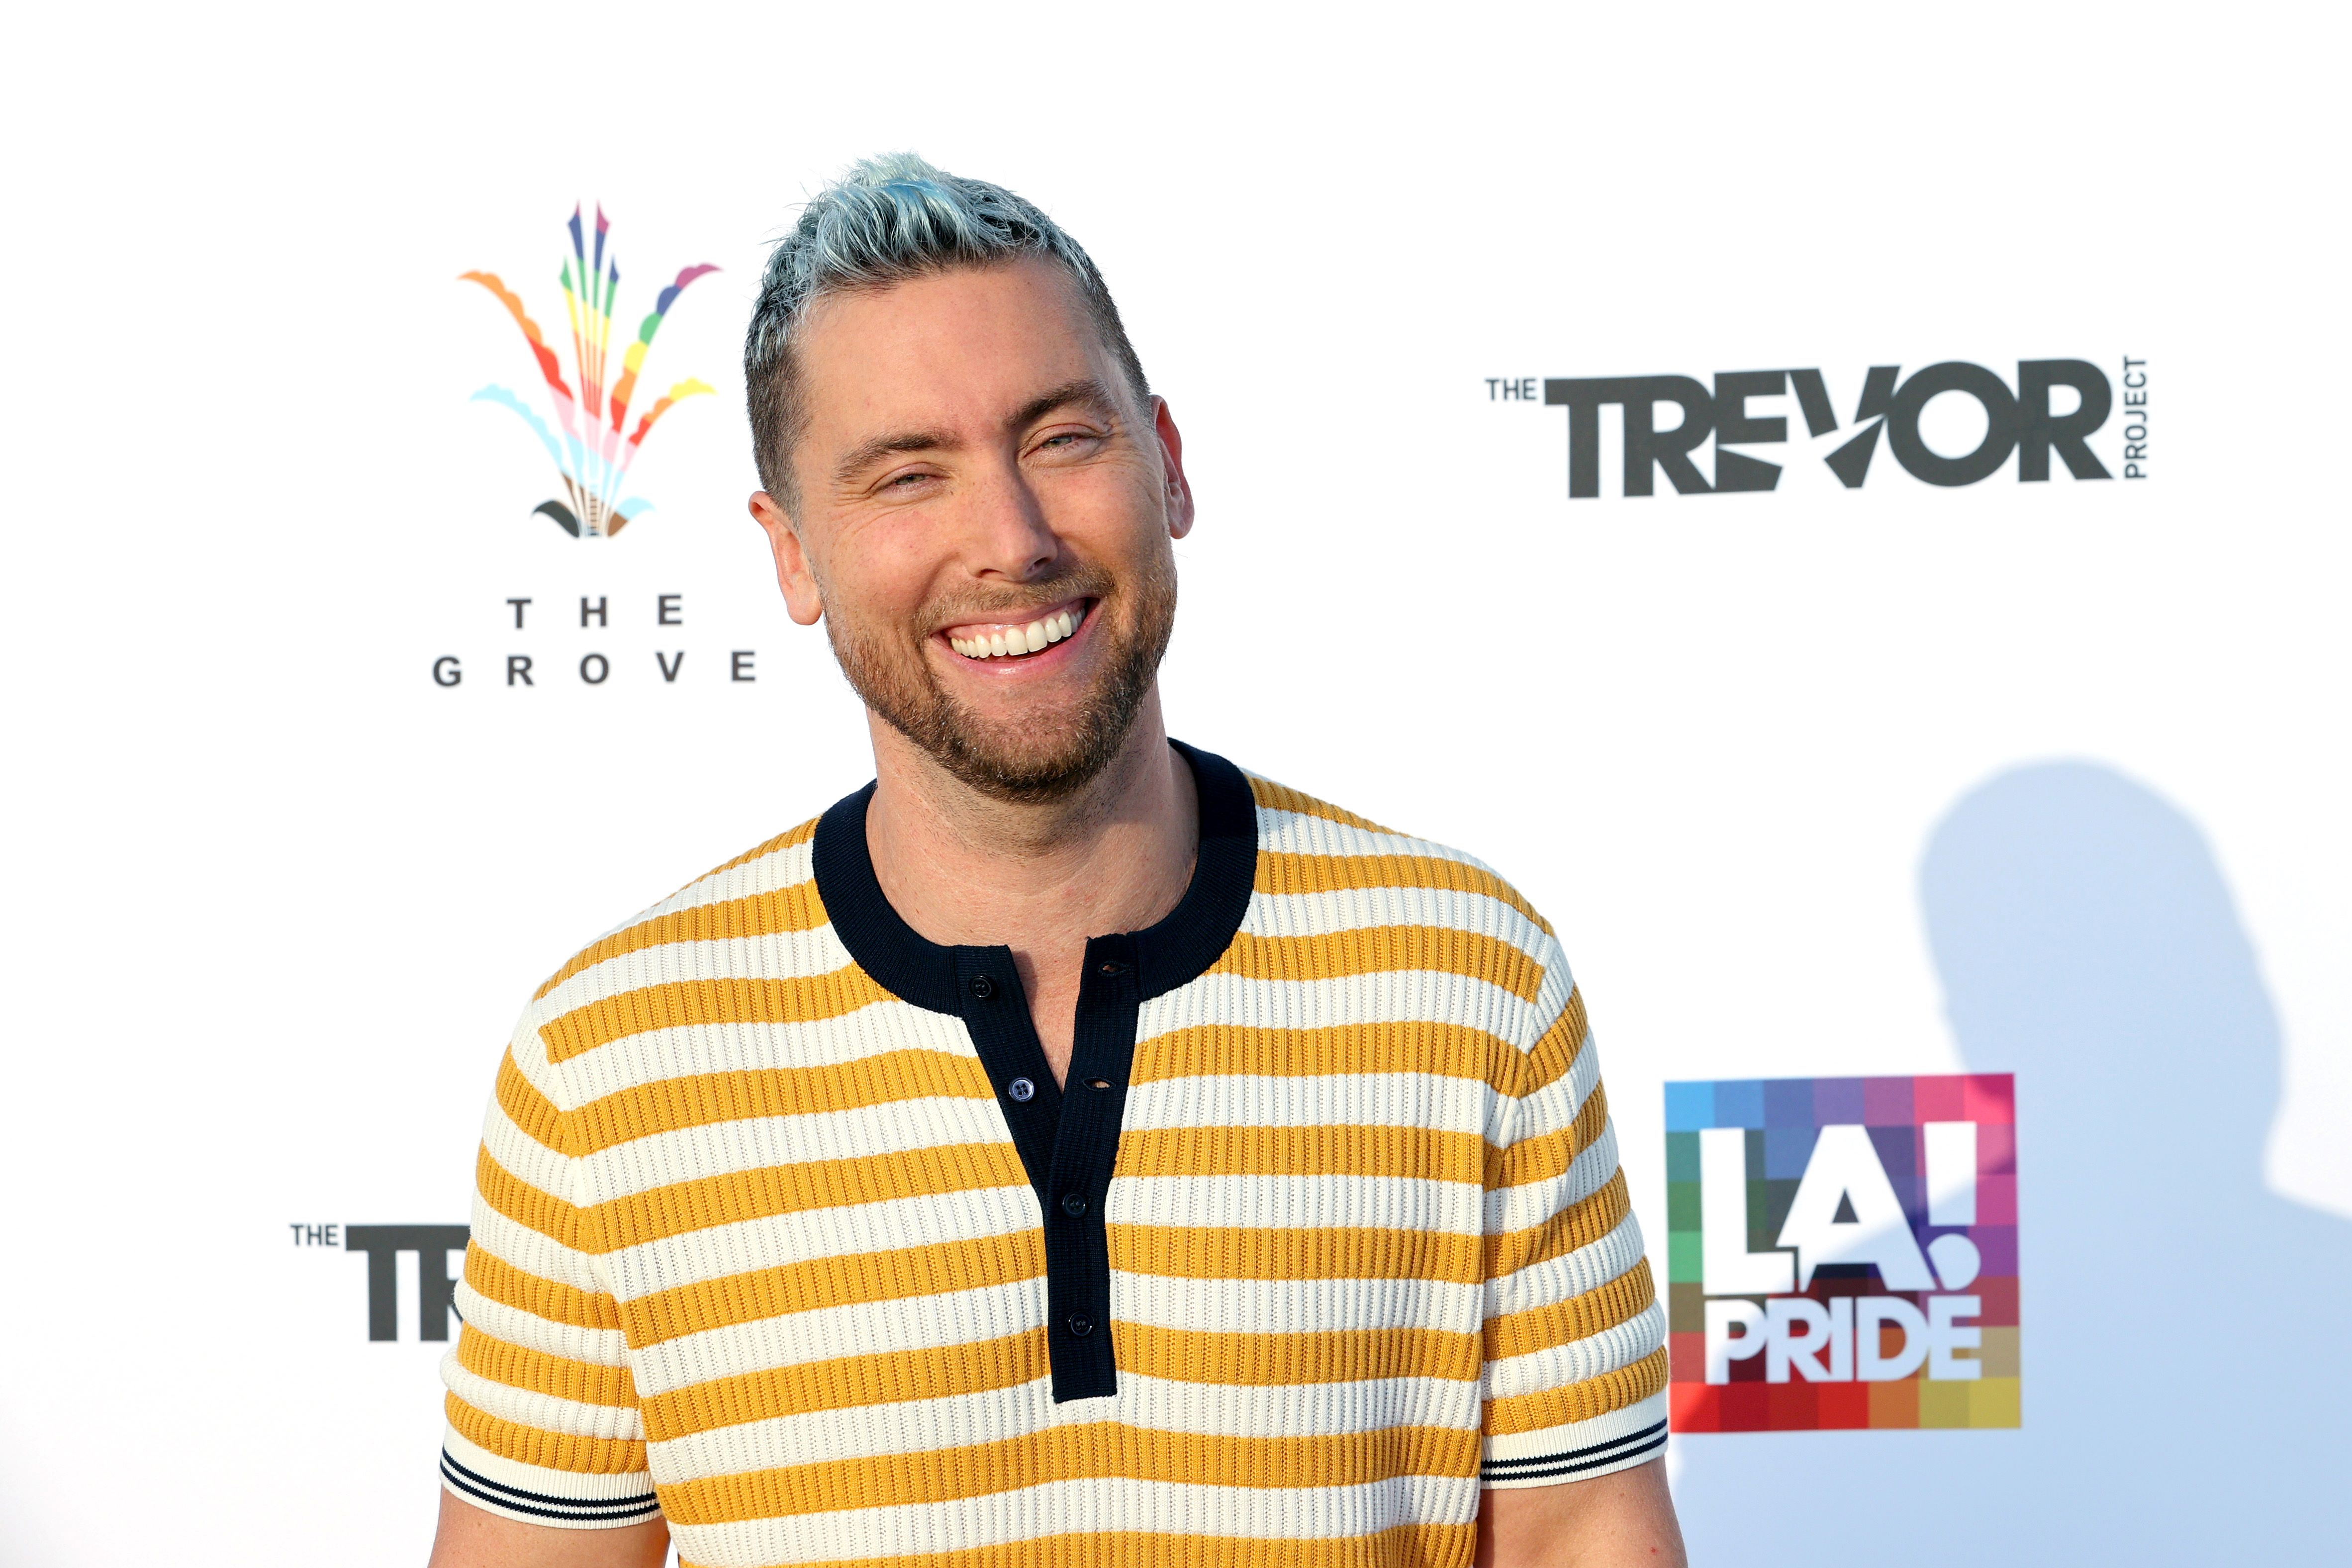 'Bachelor in Paradise' guest host Lance Bass in a yellow and white striped shirt smiling